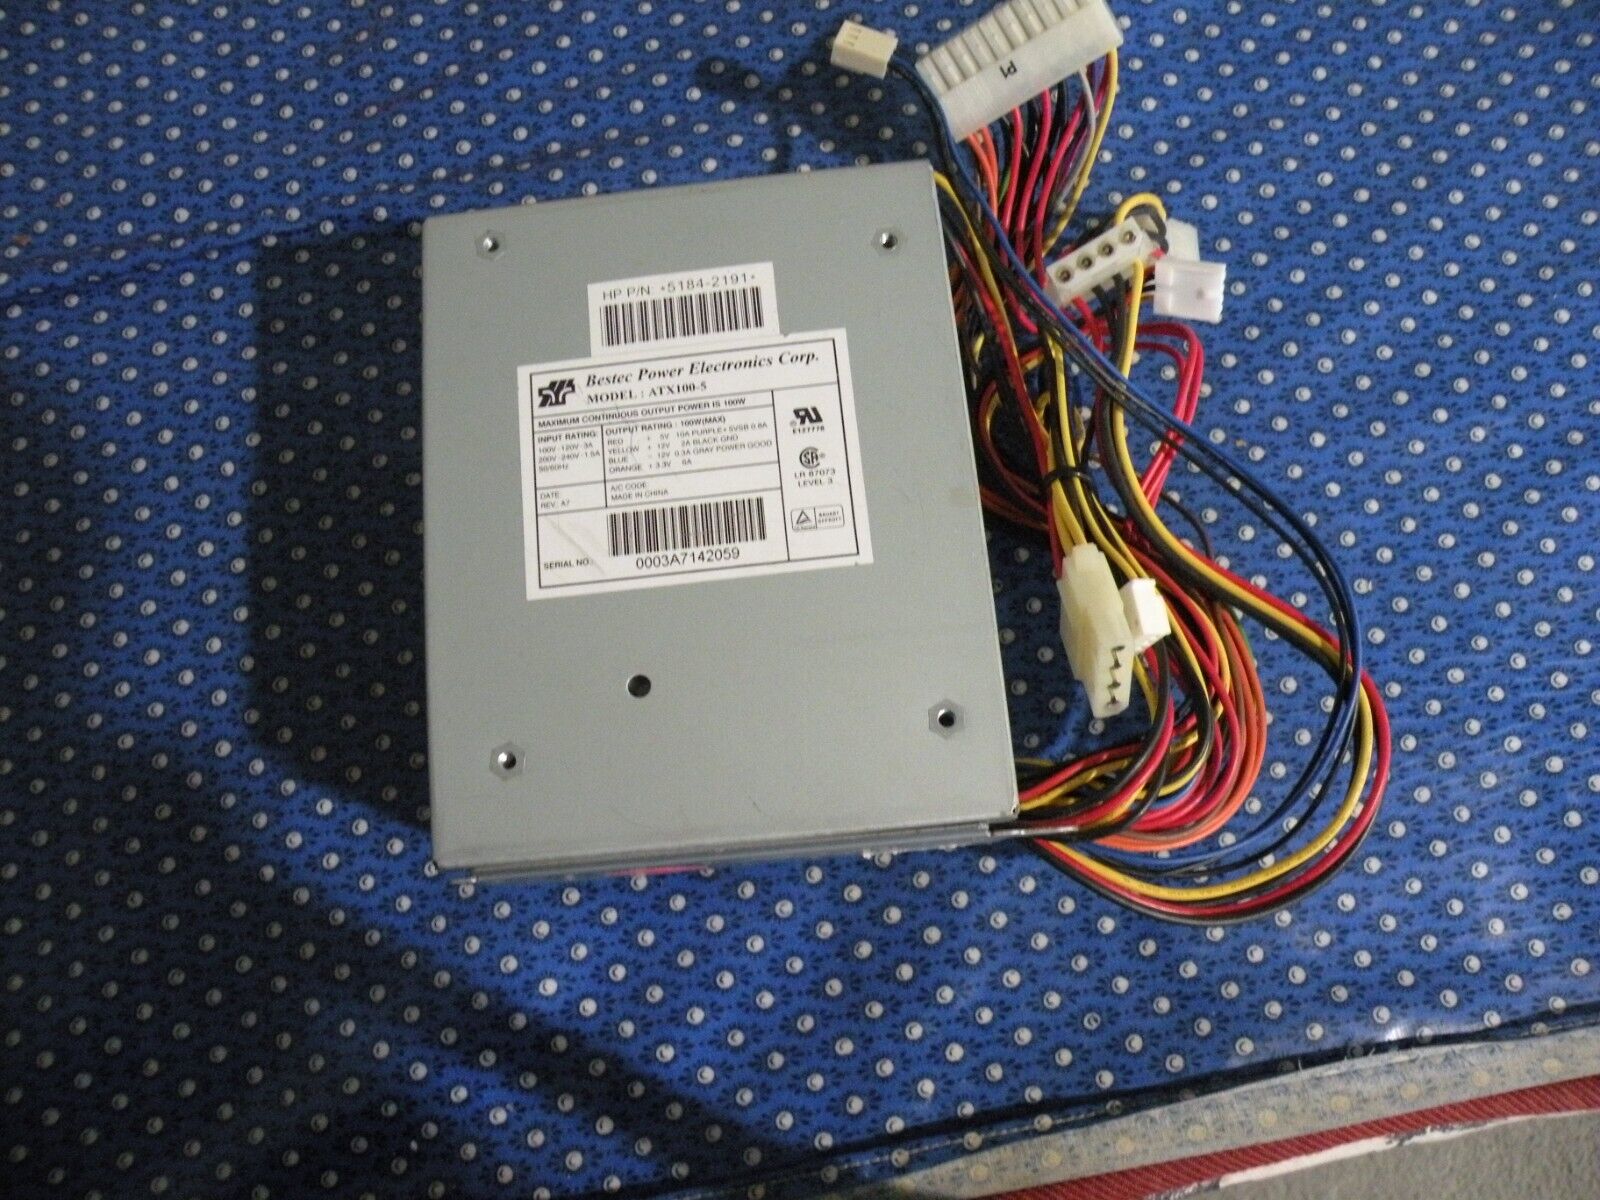 Desk top computer power supply model  Atx100-5 output 100w  max